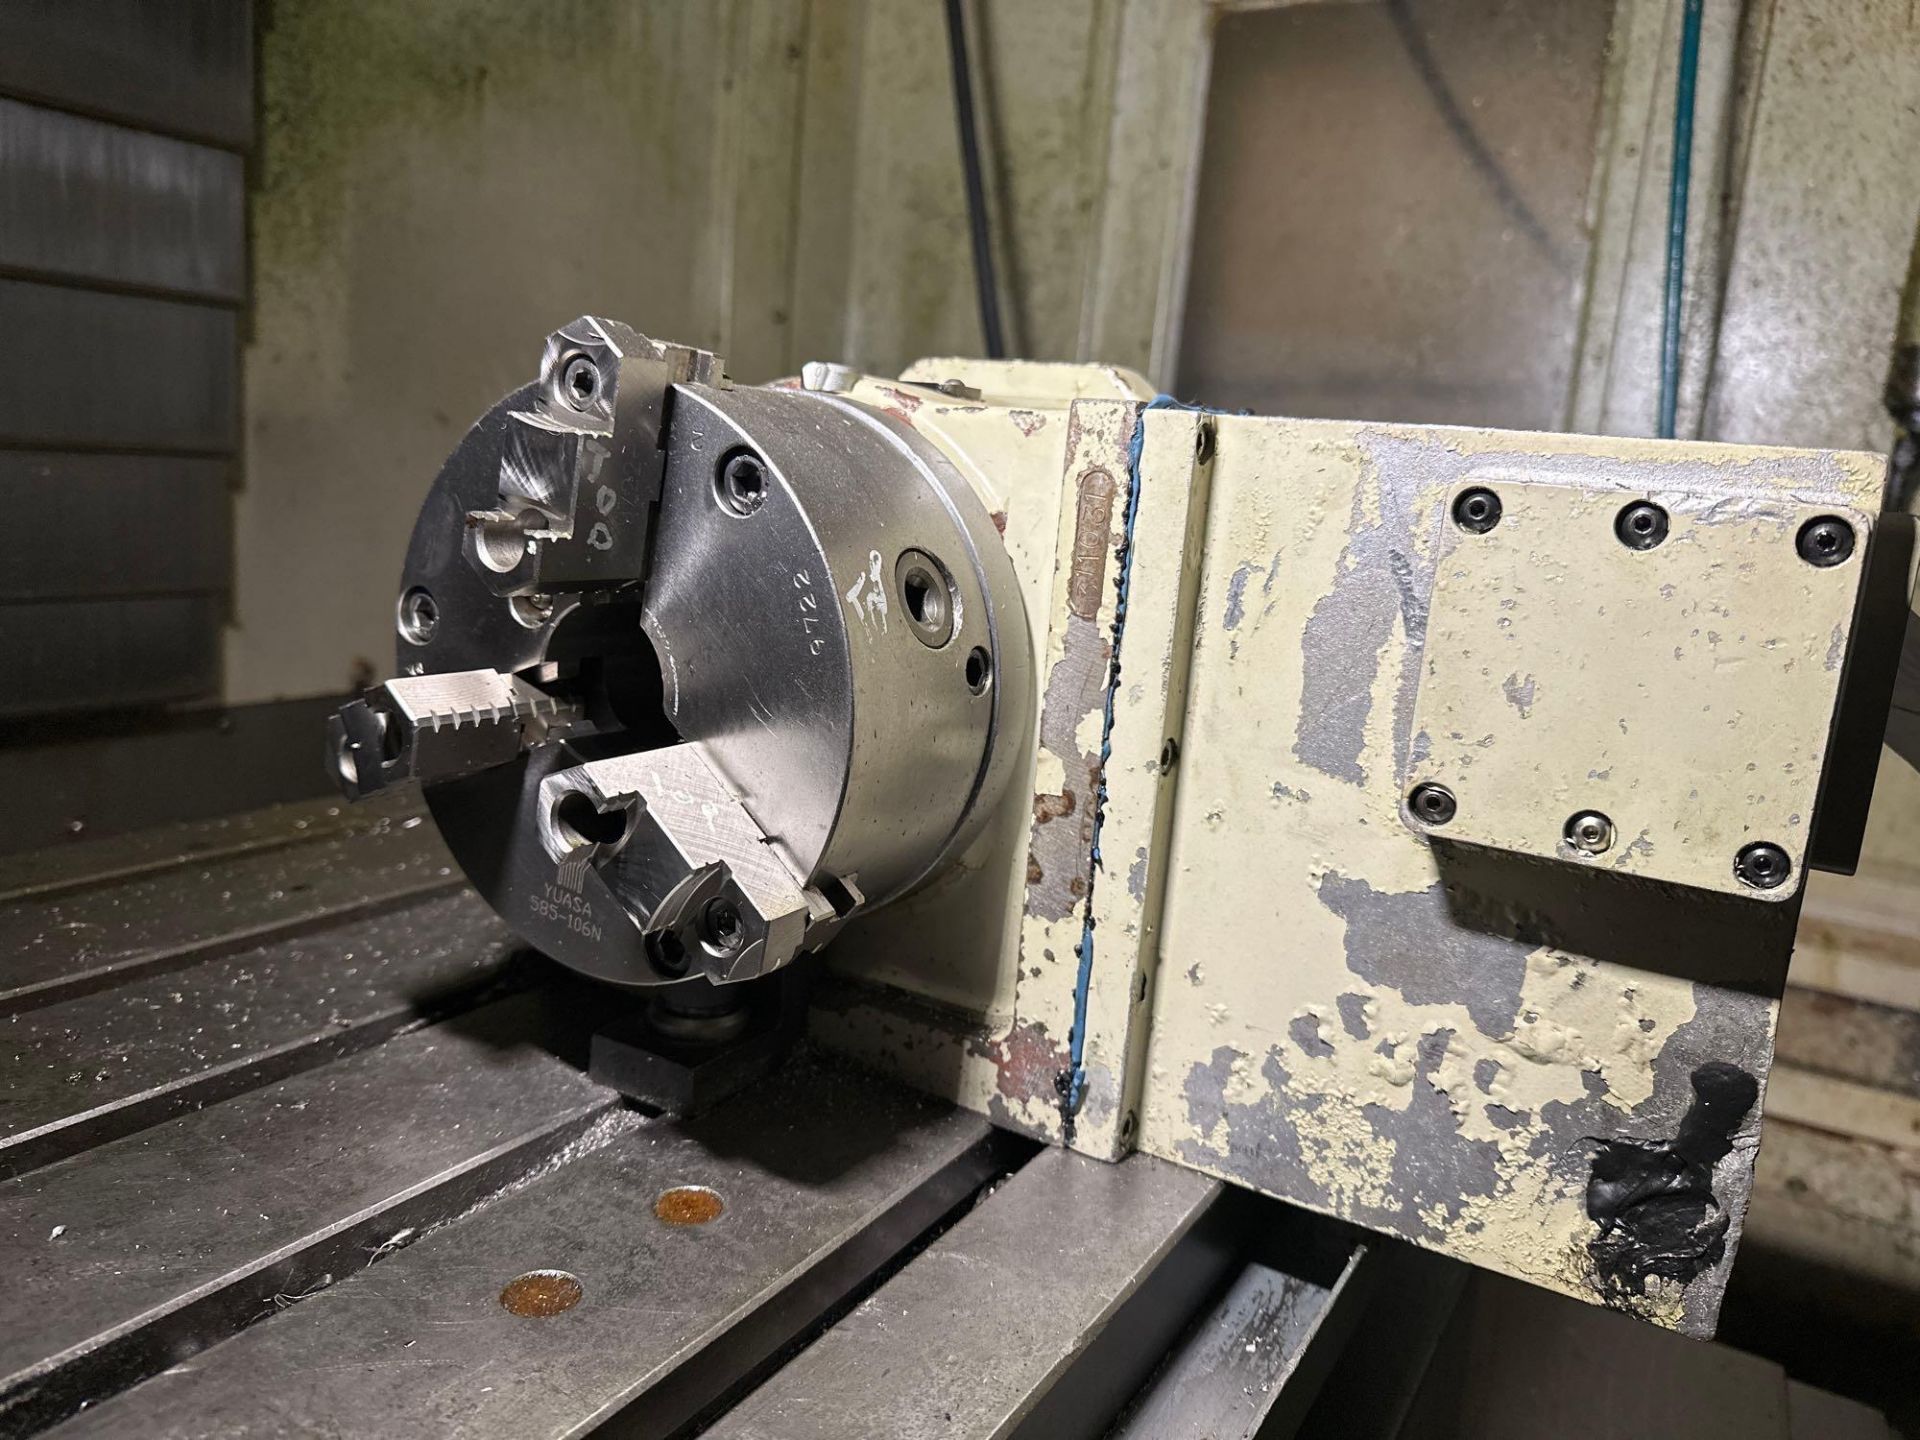 4-Axis Rotary Table w/ 6” 3-Jaw Chuck and Tailstock - Image 4 of 6